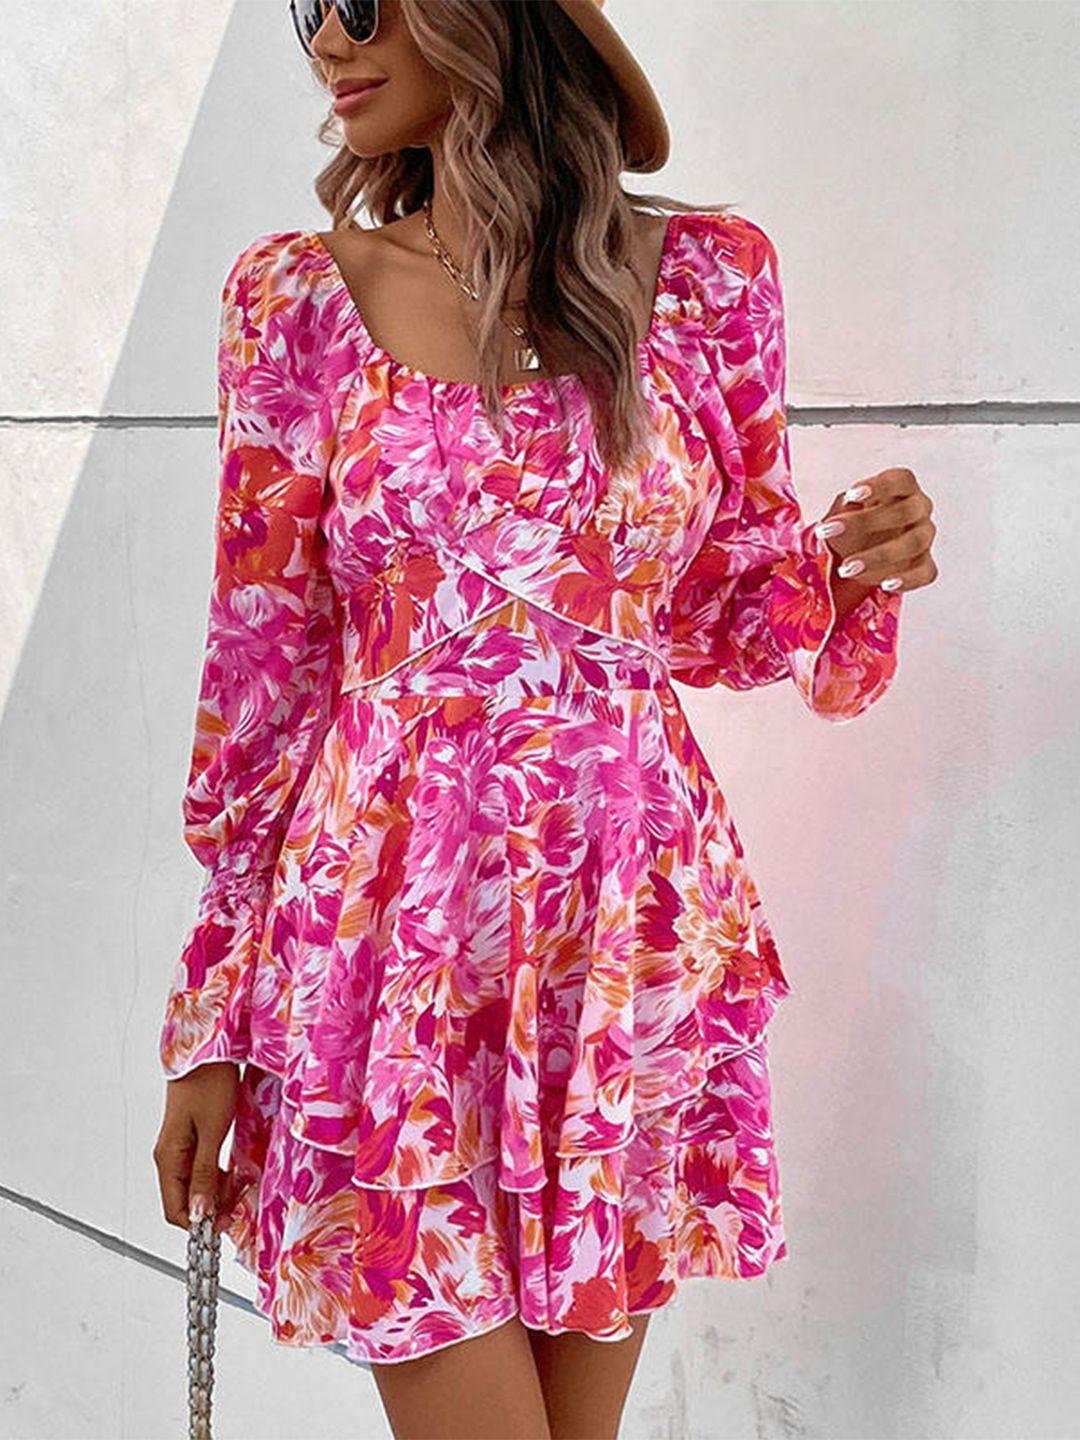 stylecast pink floral printed bell sleeves layered fit & flare mini dress